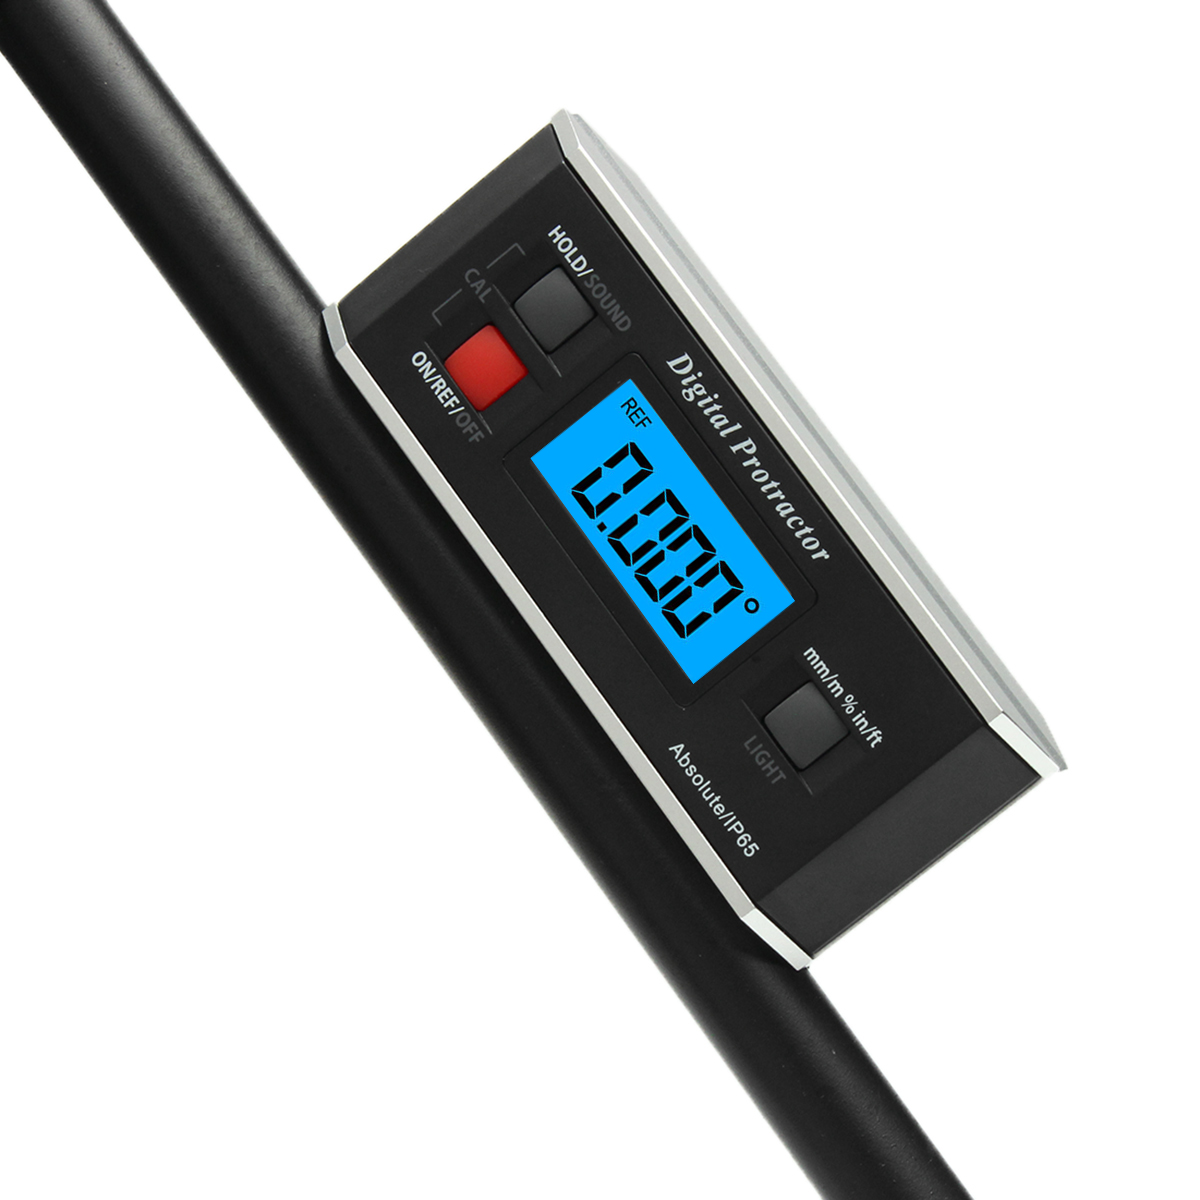 Details about   TL90 Digital Pitch Gauge LCD Backlight Display Blades Angle Measurement Tool 